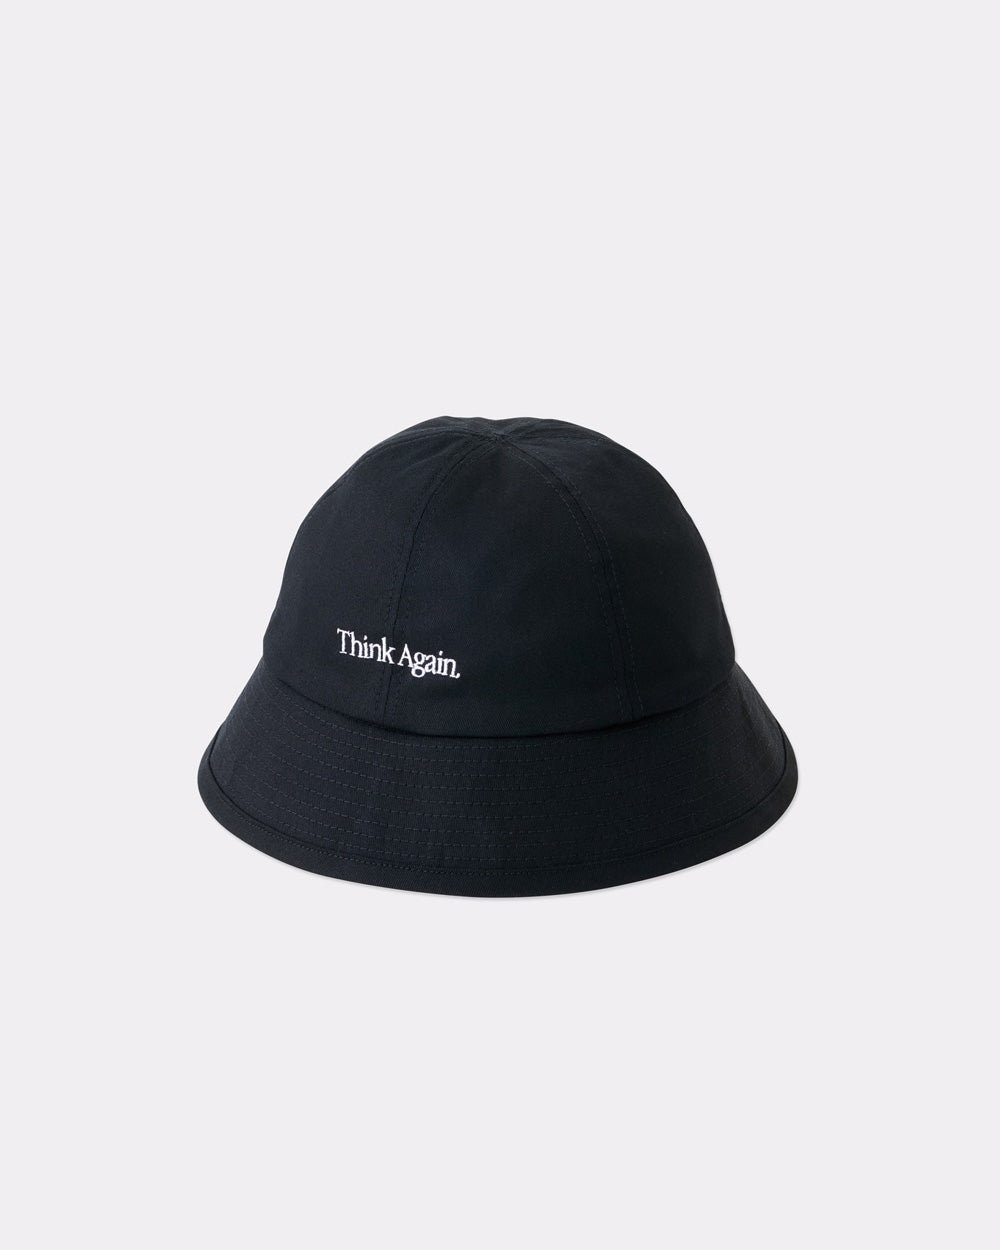 [NEW YOURS] PANEL HAT/THINK AGAIN - BLACK